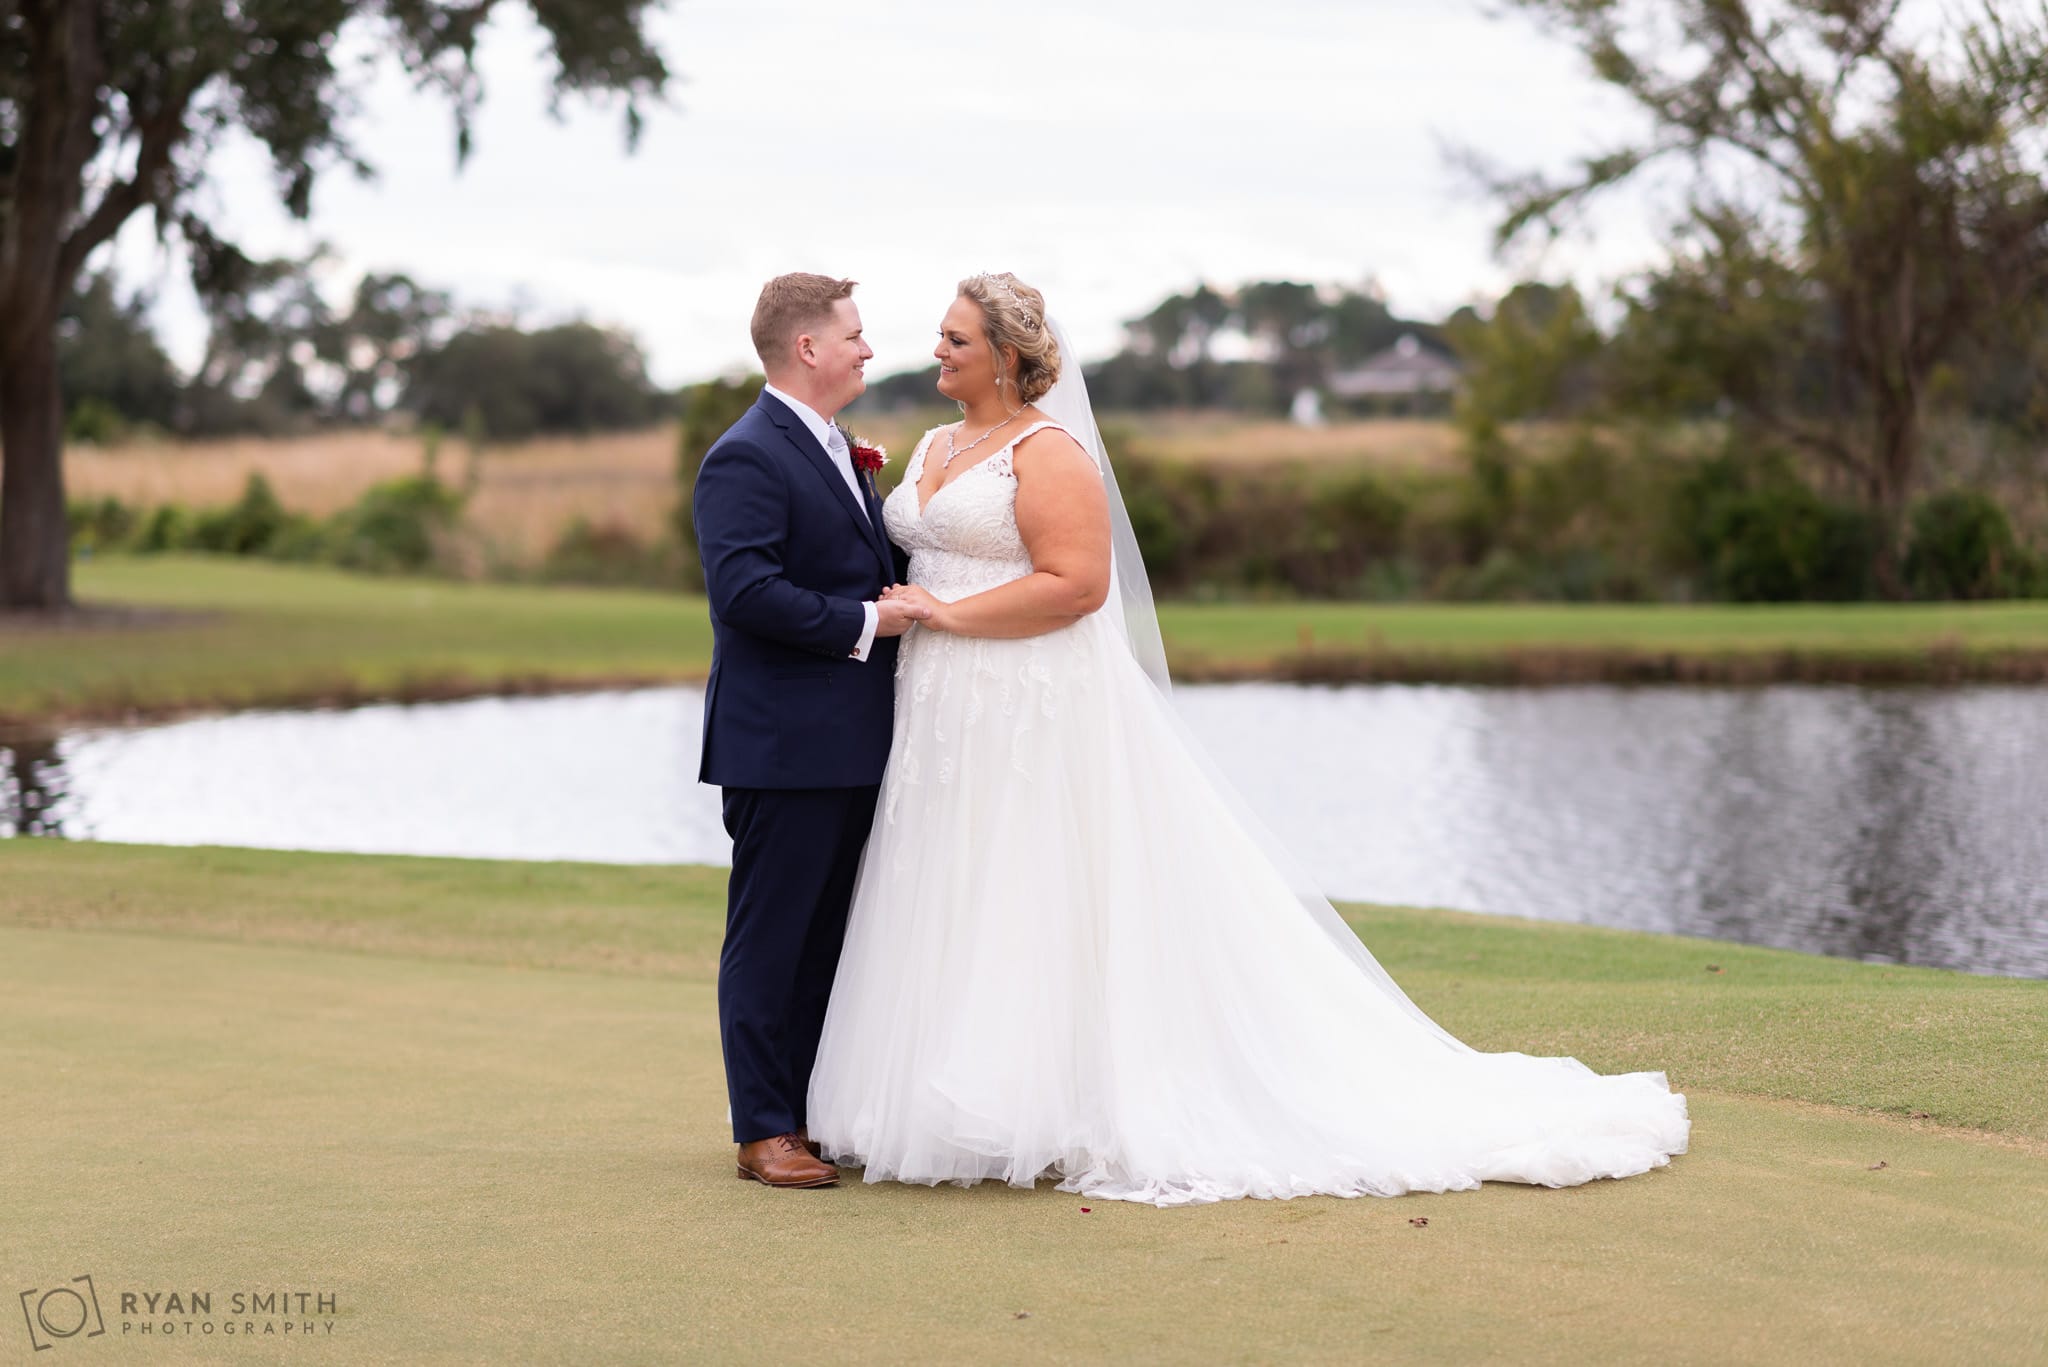 Bride and groom holding hands on the golf course